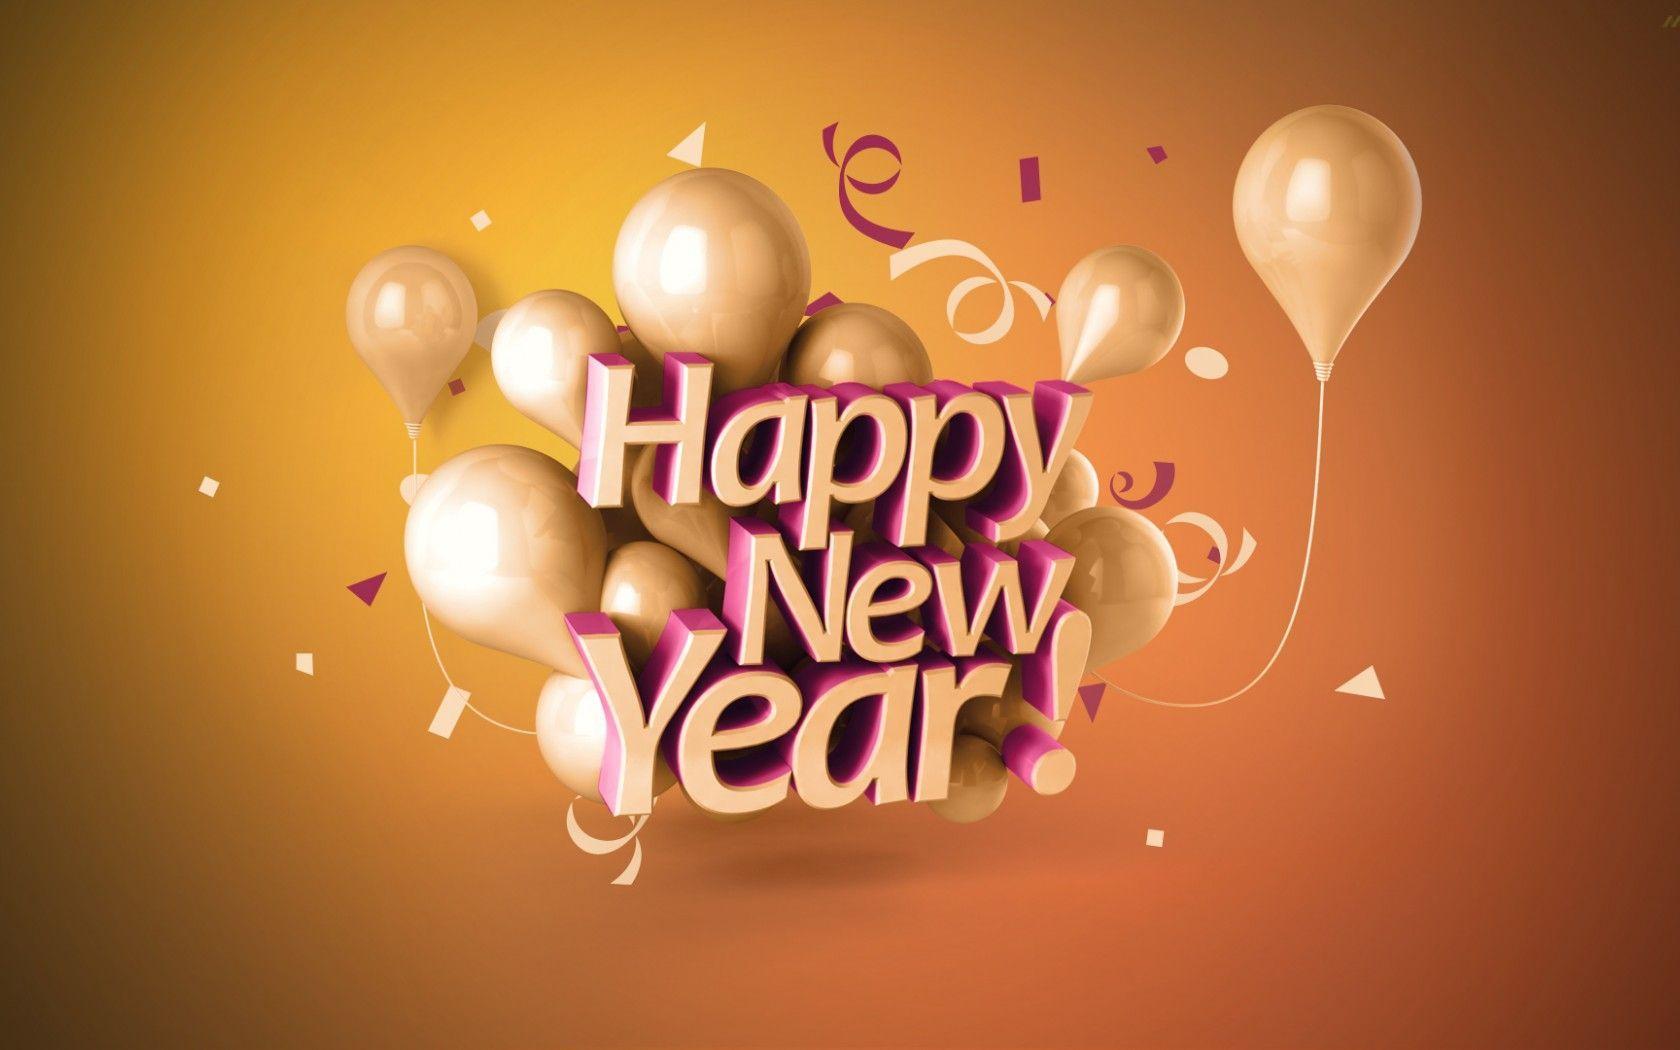 Beautiful Happy New Year Wallpaper HD. Cards.Cards.Cards